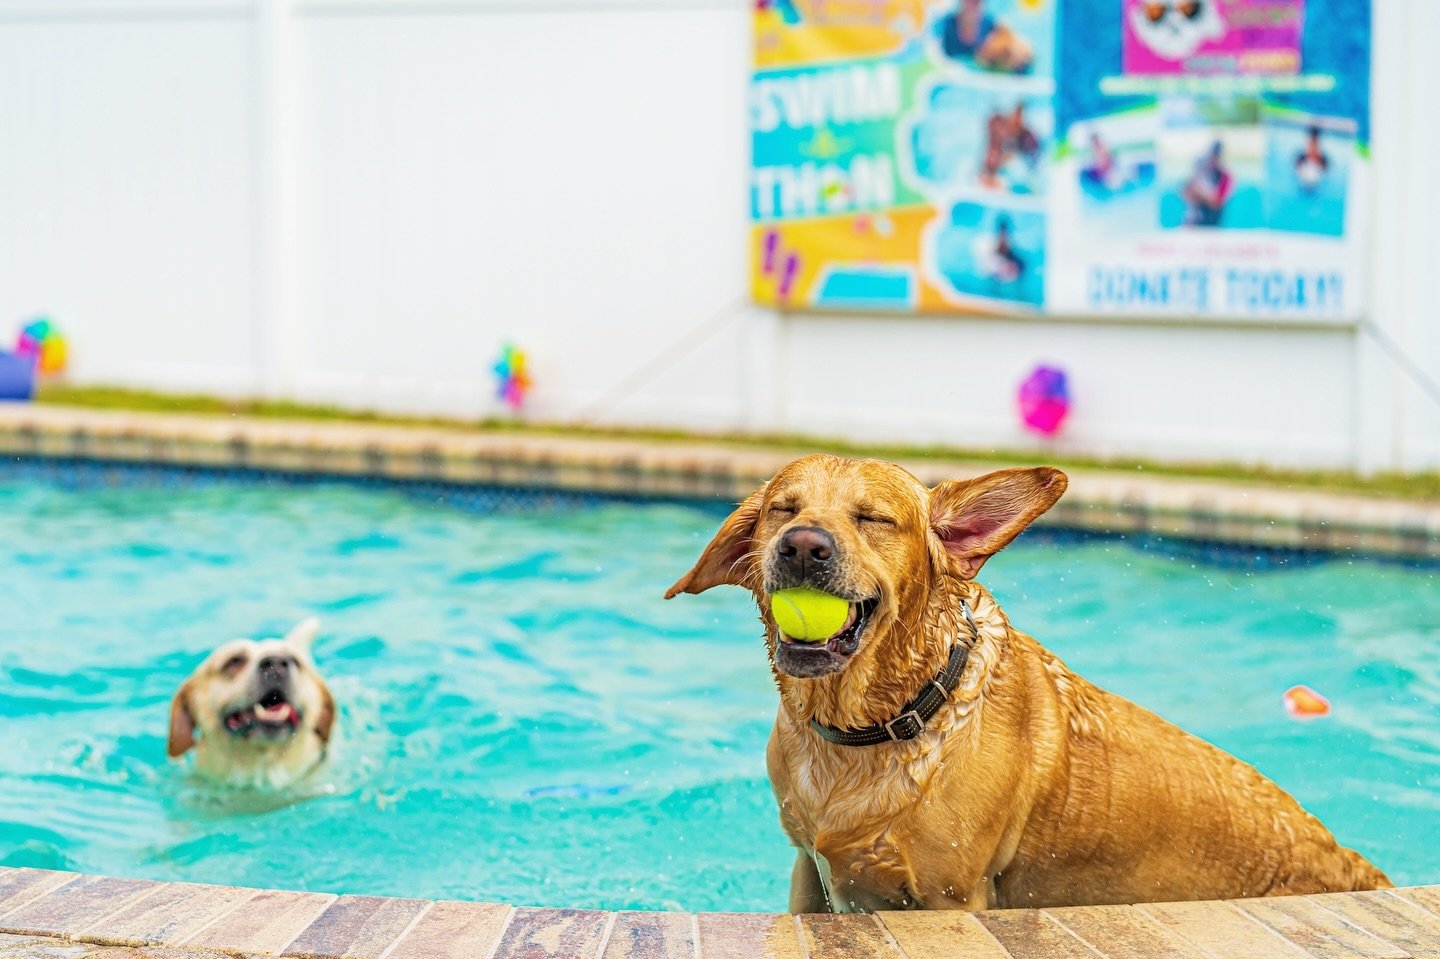 This pretty much sums up what a swim sesh on a beautiful day with your friends at our pool looks like🤪🎾

💻DIPNDOGS.com
📲(407)227-0030
📧Rachel@dipndogs.com

#🐠☀️😎🎉💦🏄🏻&zwj;♂️🏄🏼